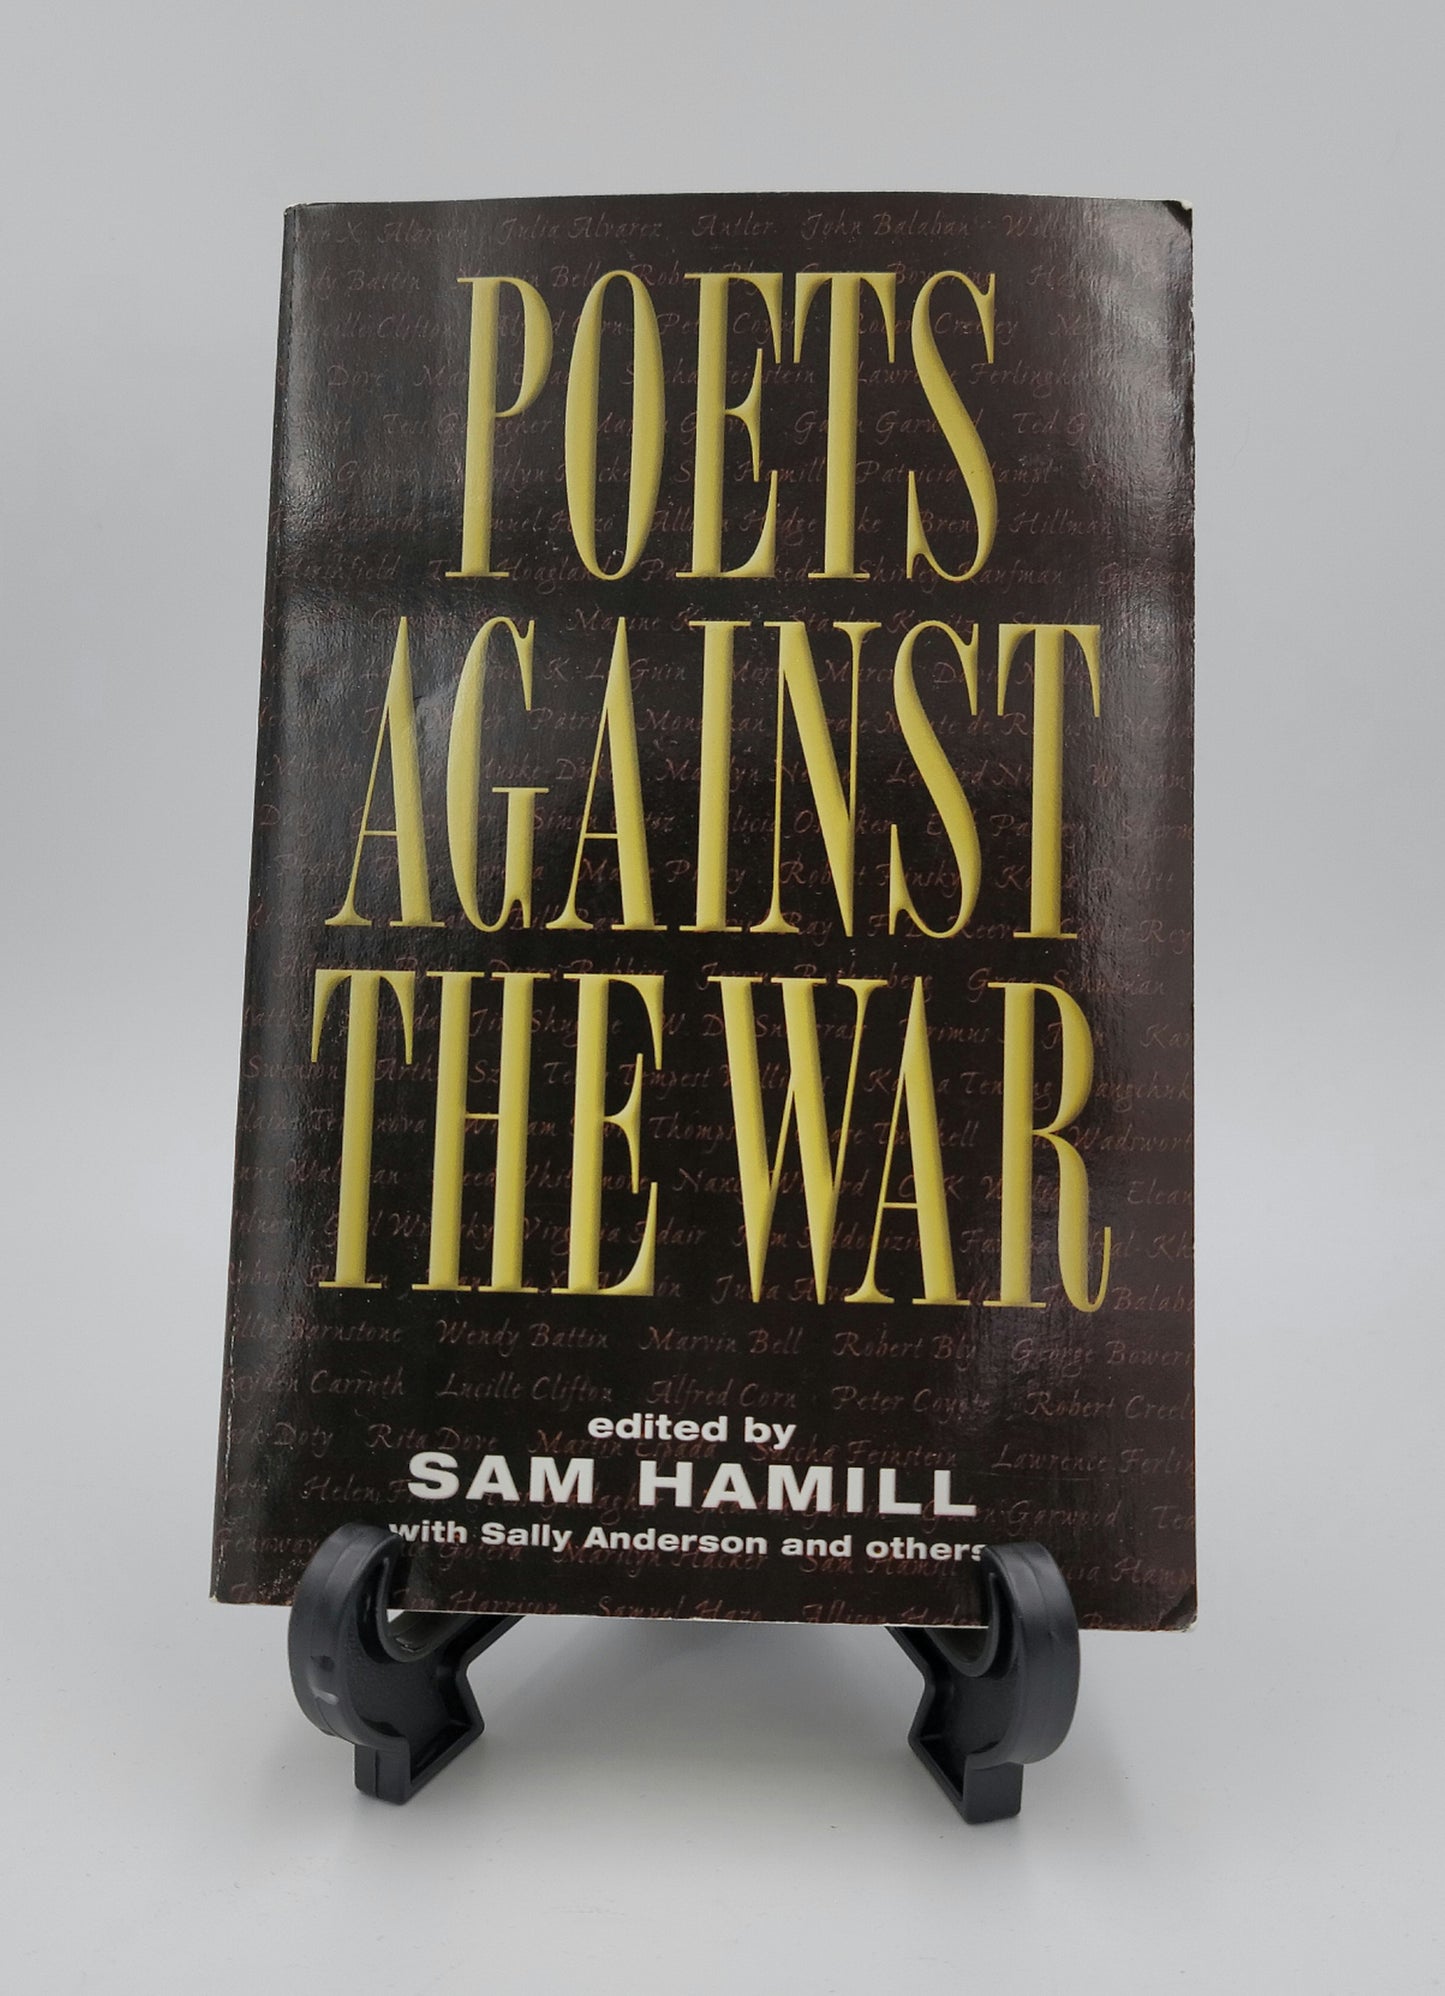 Poets Against the War edited by Sam Hamill